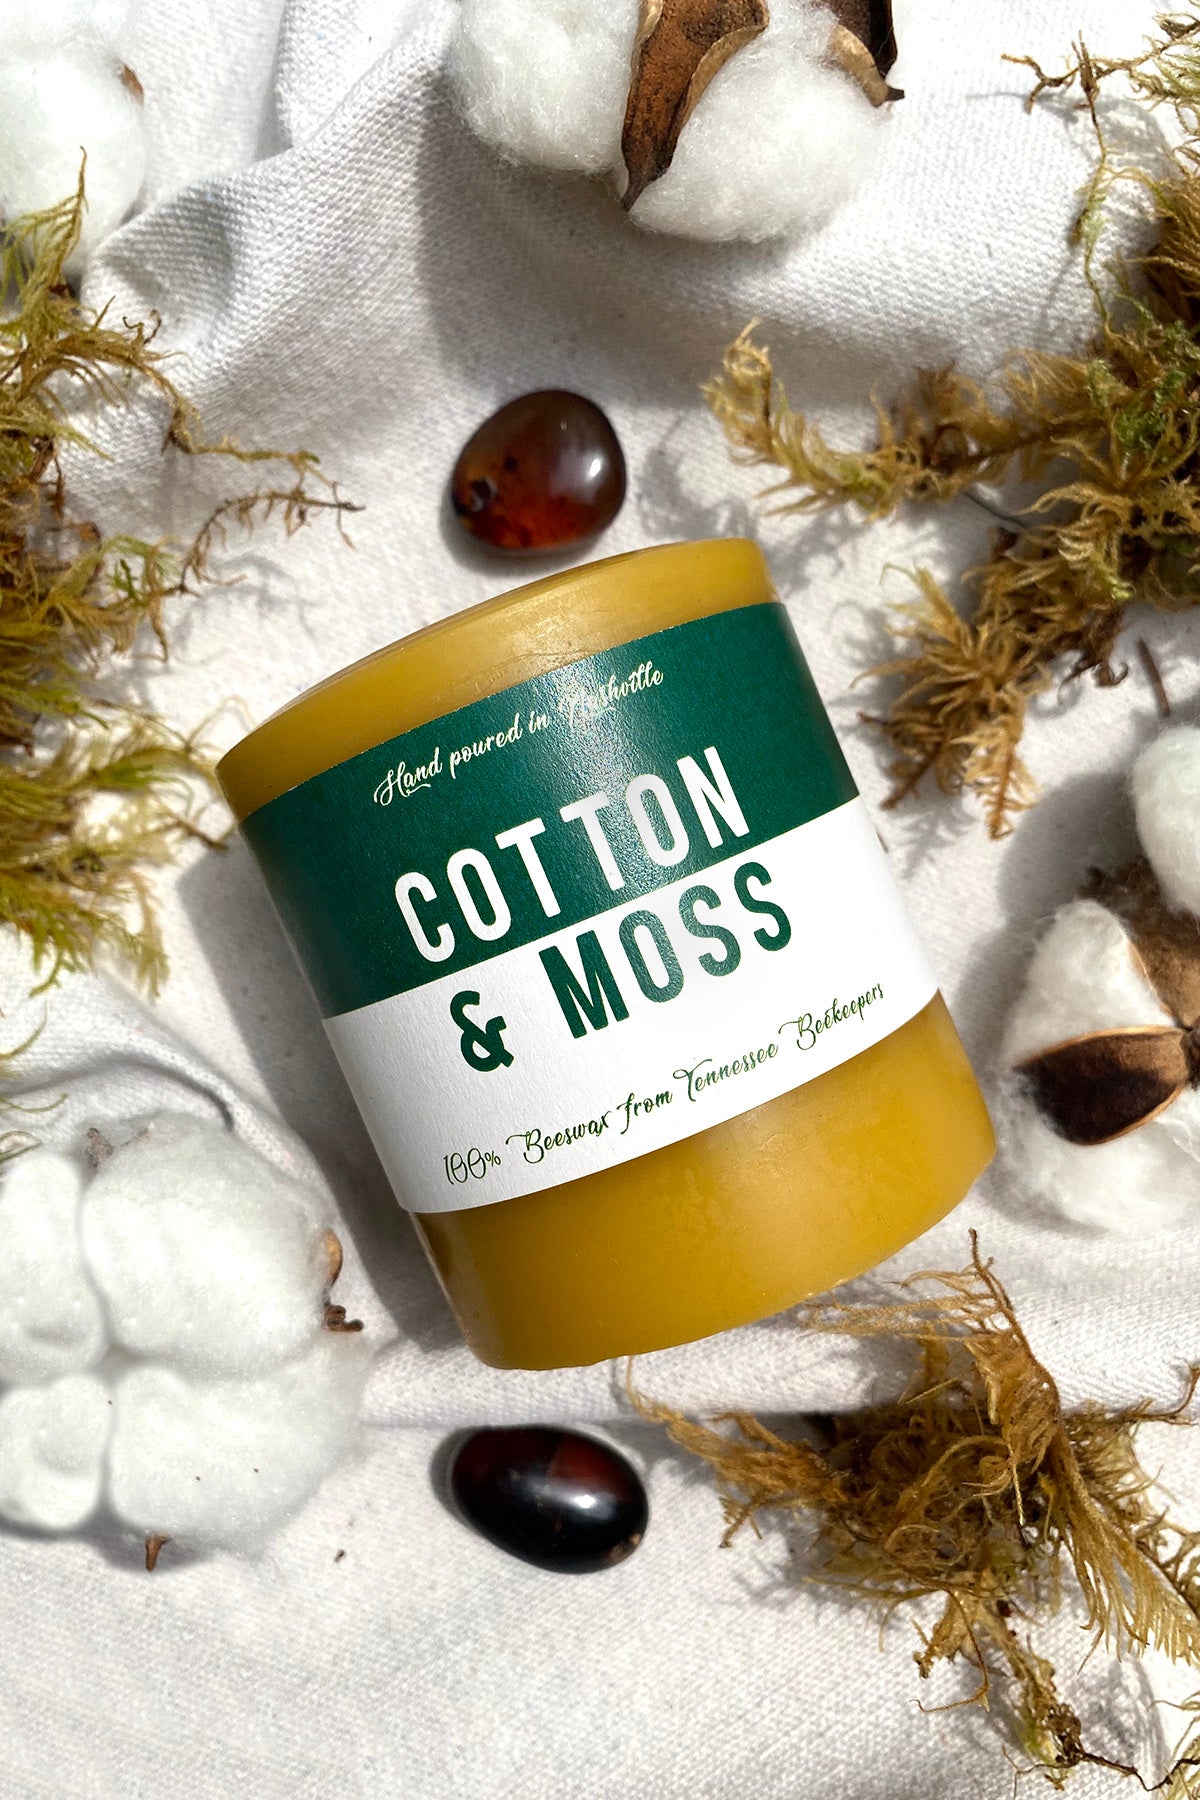 Cotton Moss Amber Beeswax Candle